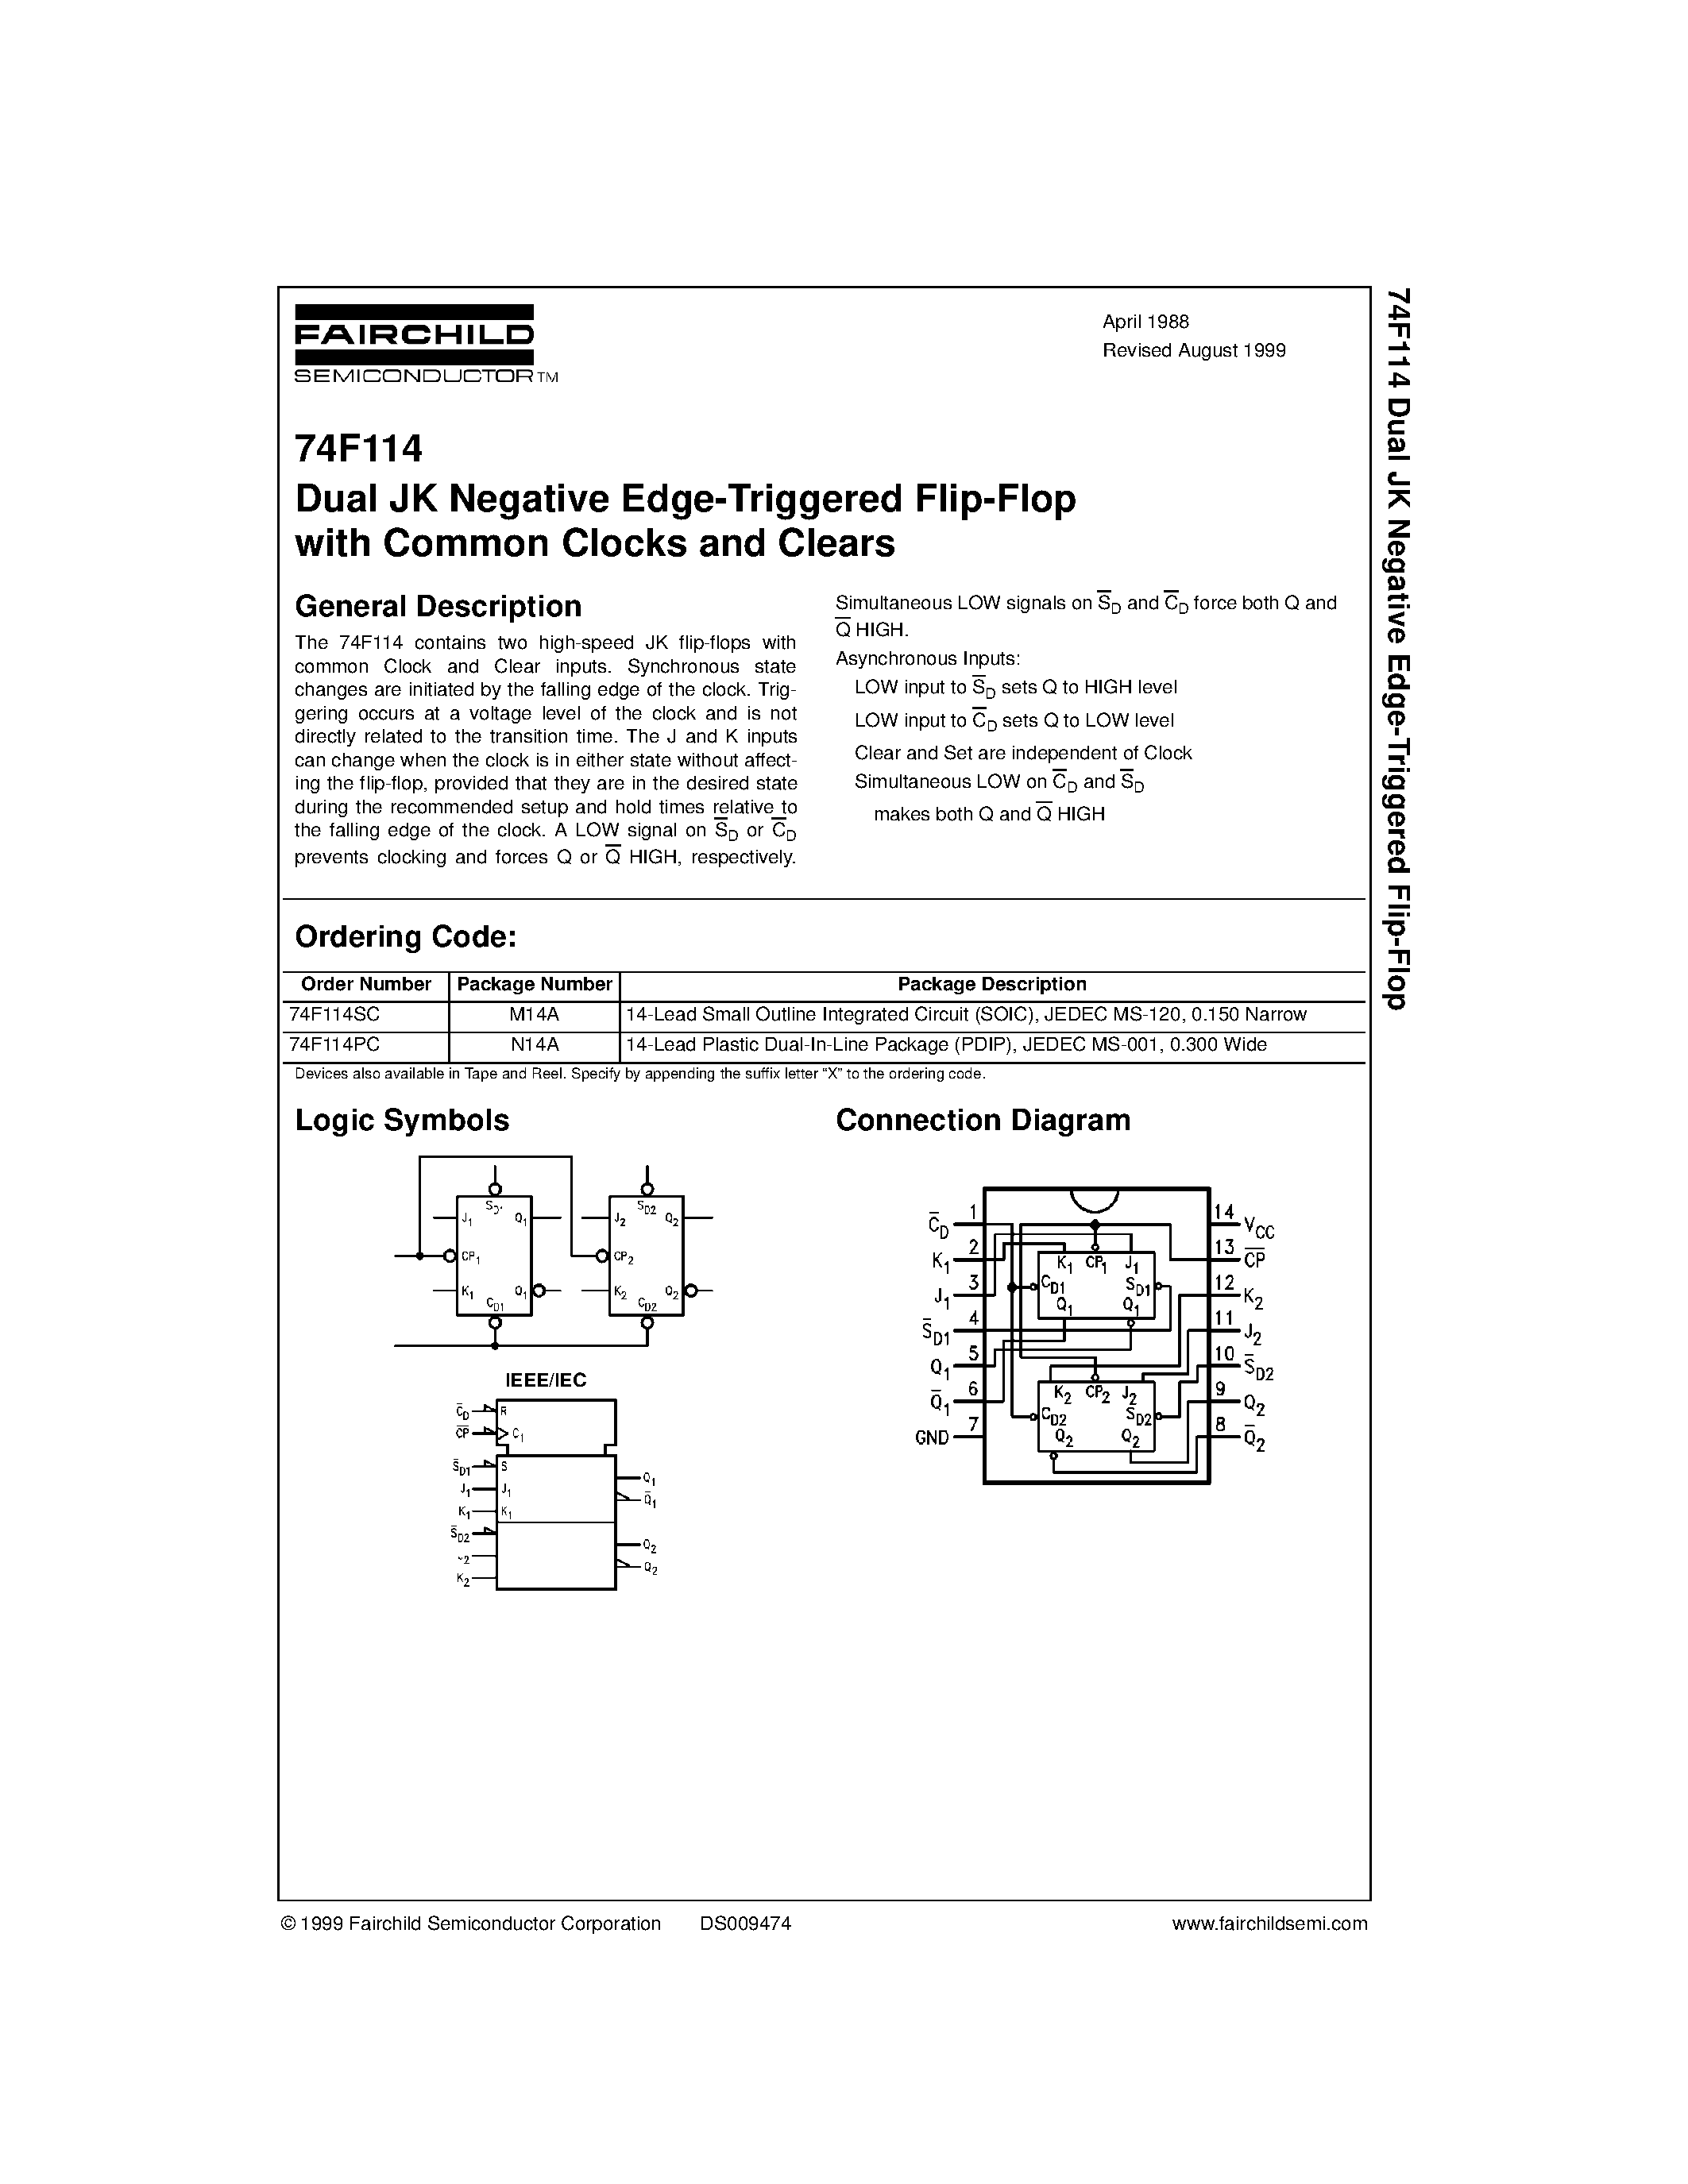 Datasheet 74F114 - Dual JK Negative Edge-Triggered Flip-Flop with Common Clocks and Clears page 1